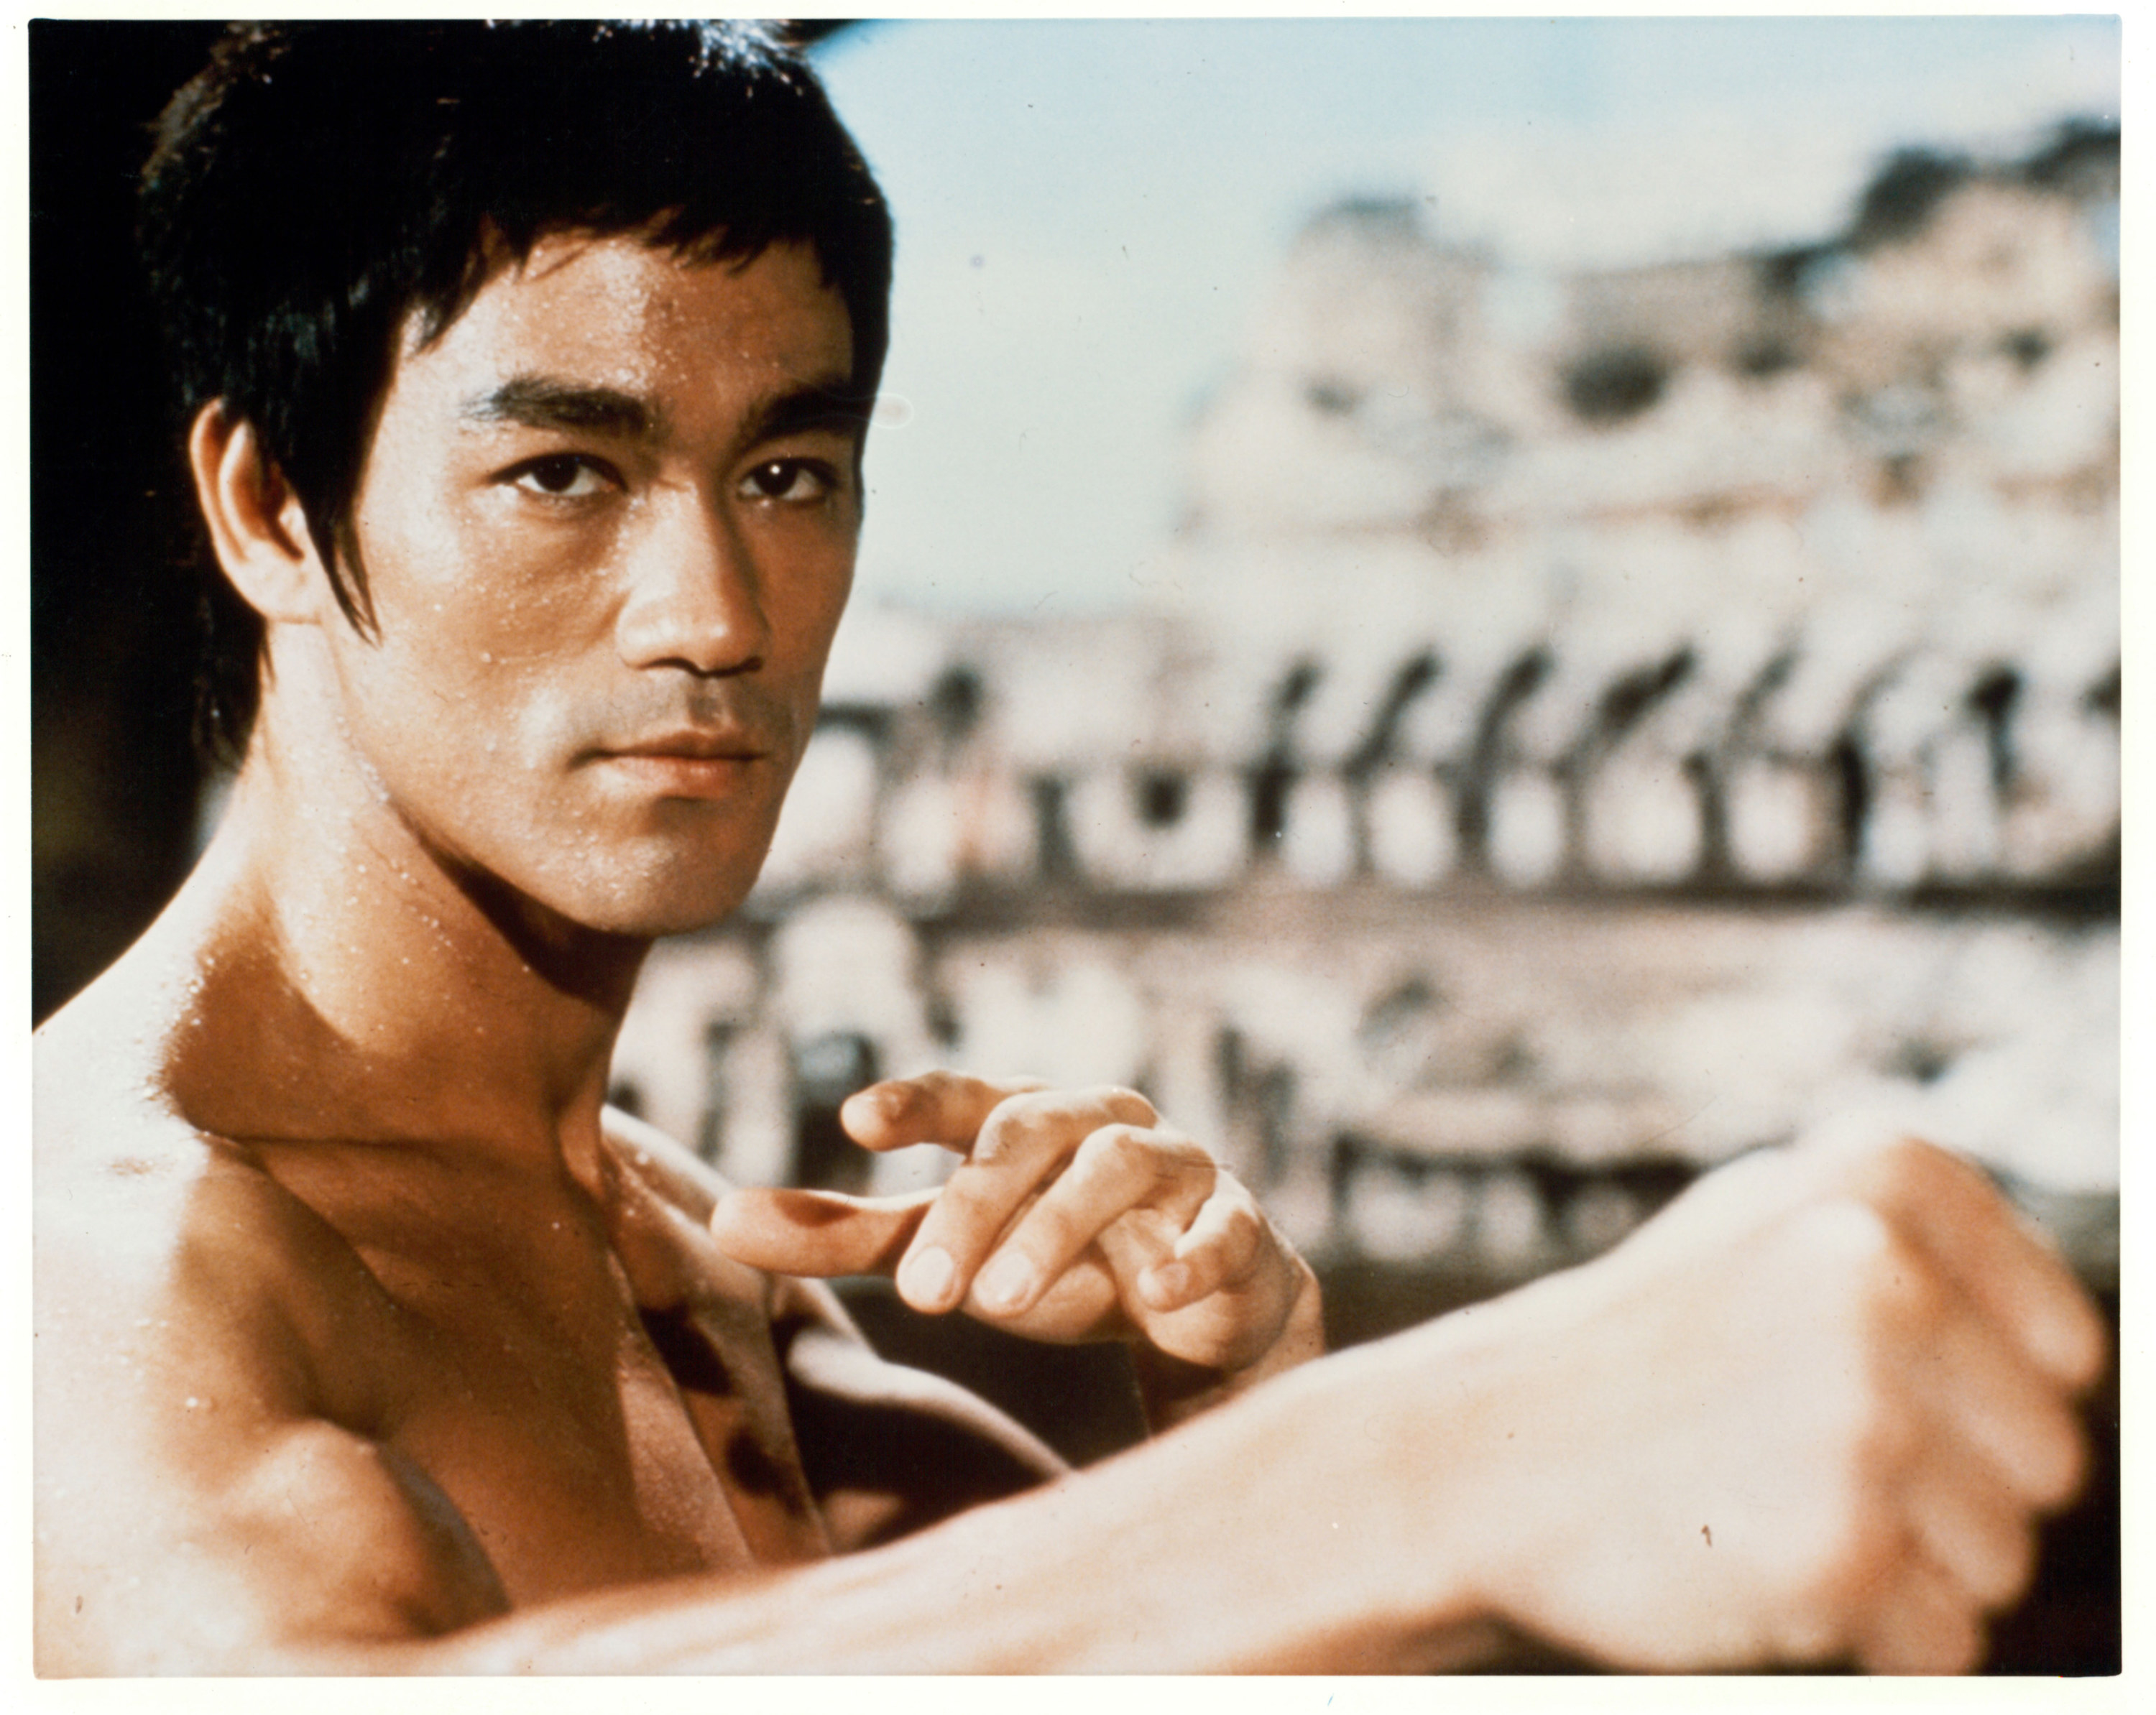 Bruce Lee in a fighting stance